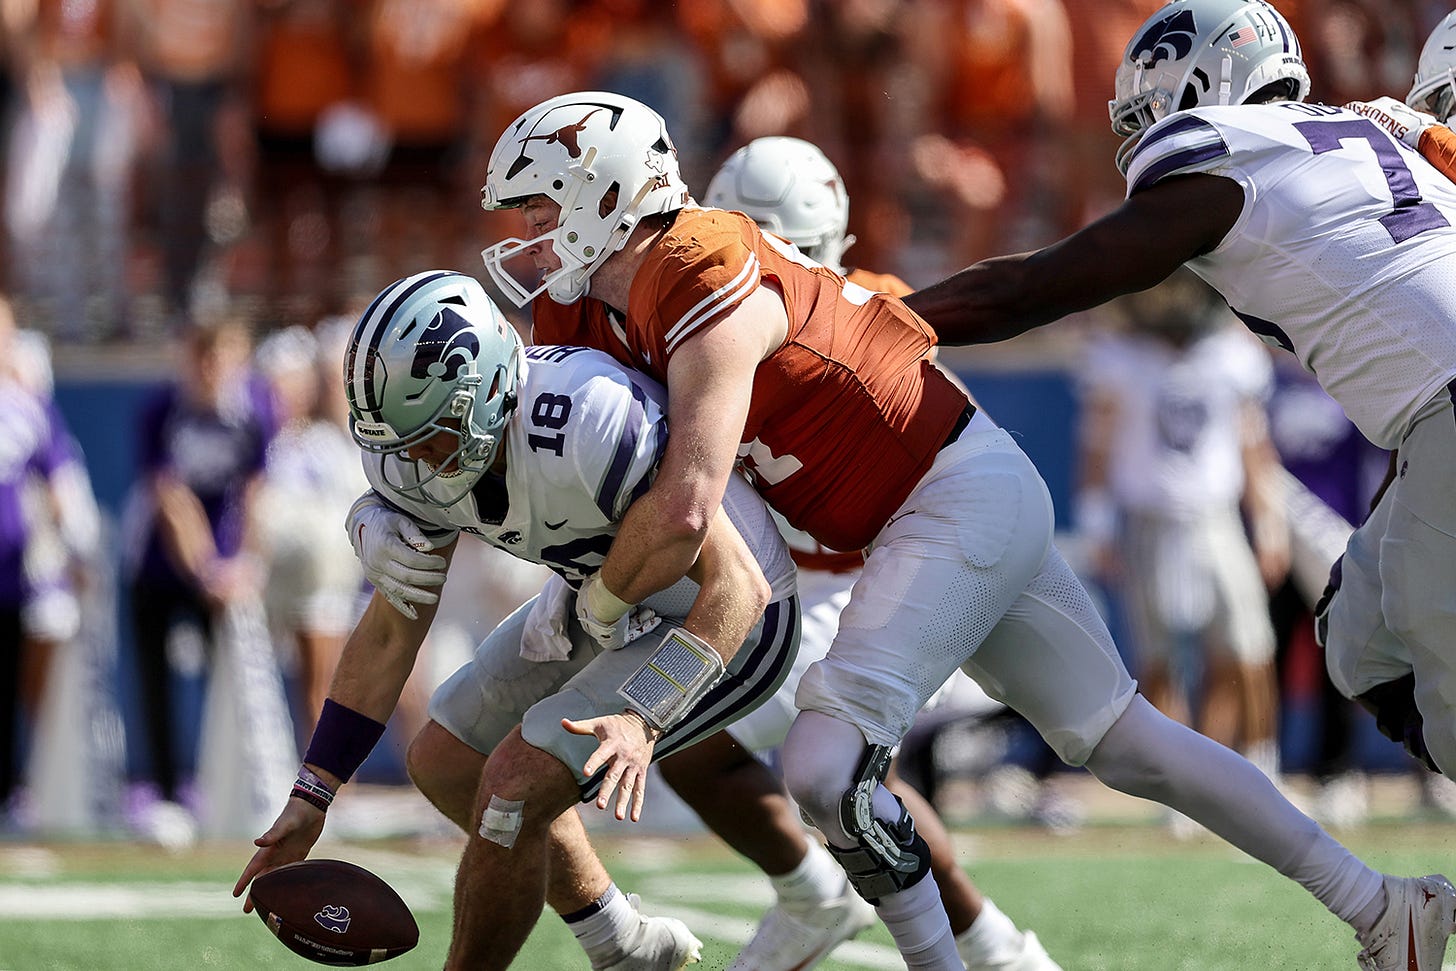 Texas withstands furious K-State comeback, wins in OT - The Iola Register